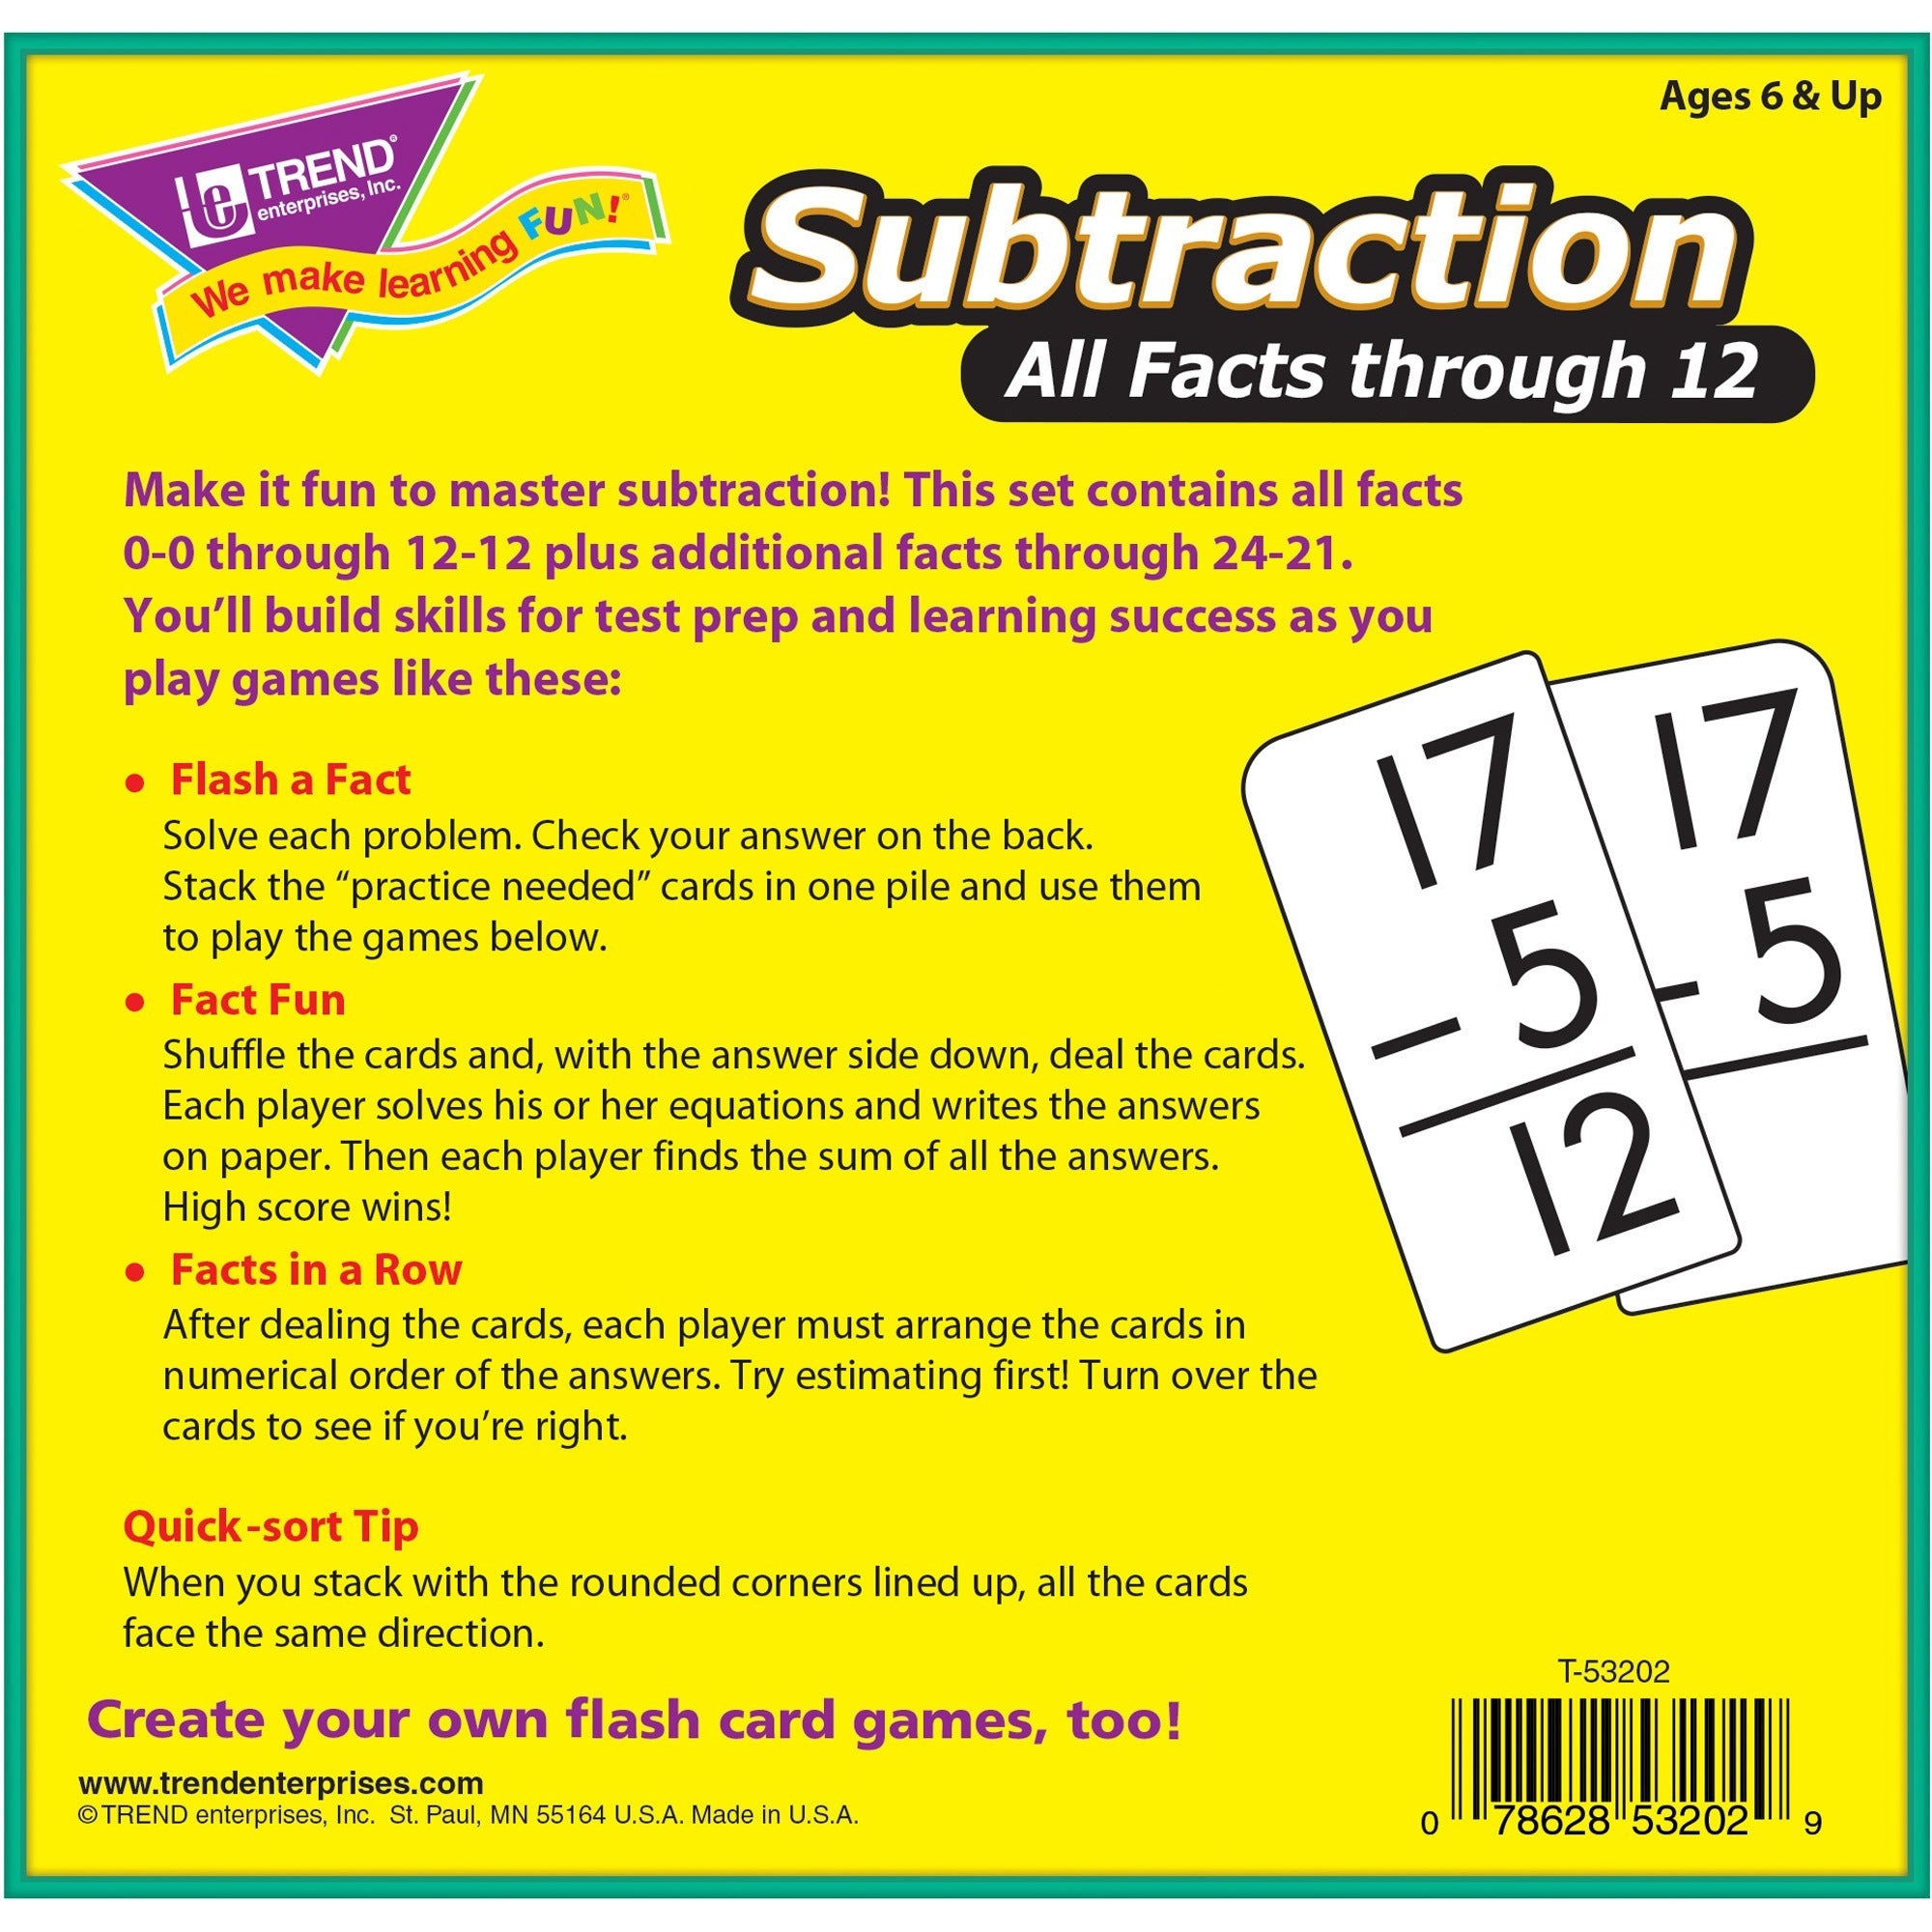 trend-subtraction-all-facts-through-12-flash-cards-theme-subject-learning-skill-learning-subtraction-169-pieces-6+-169-box_tep53202 - 2